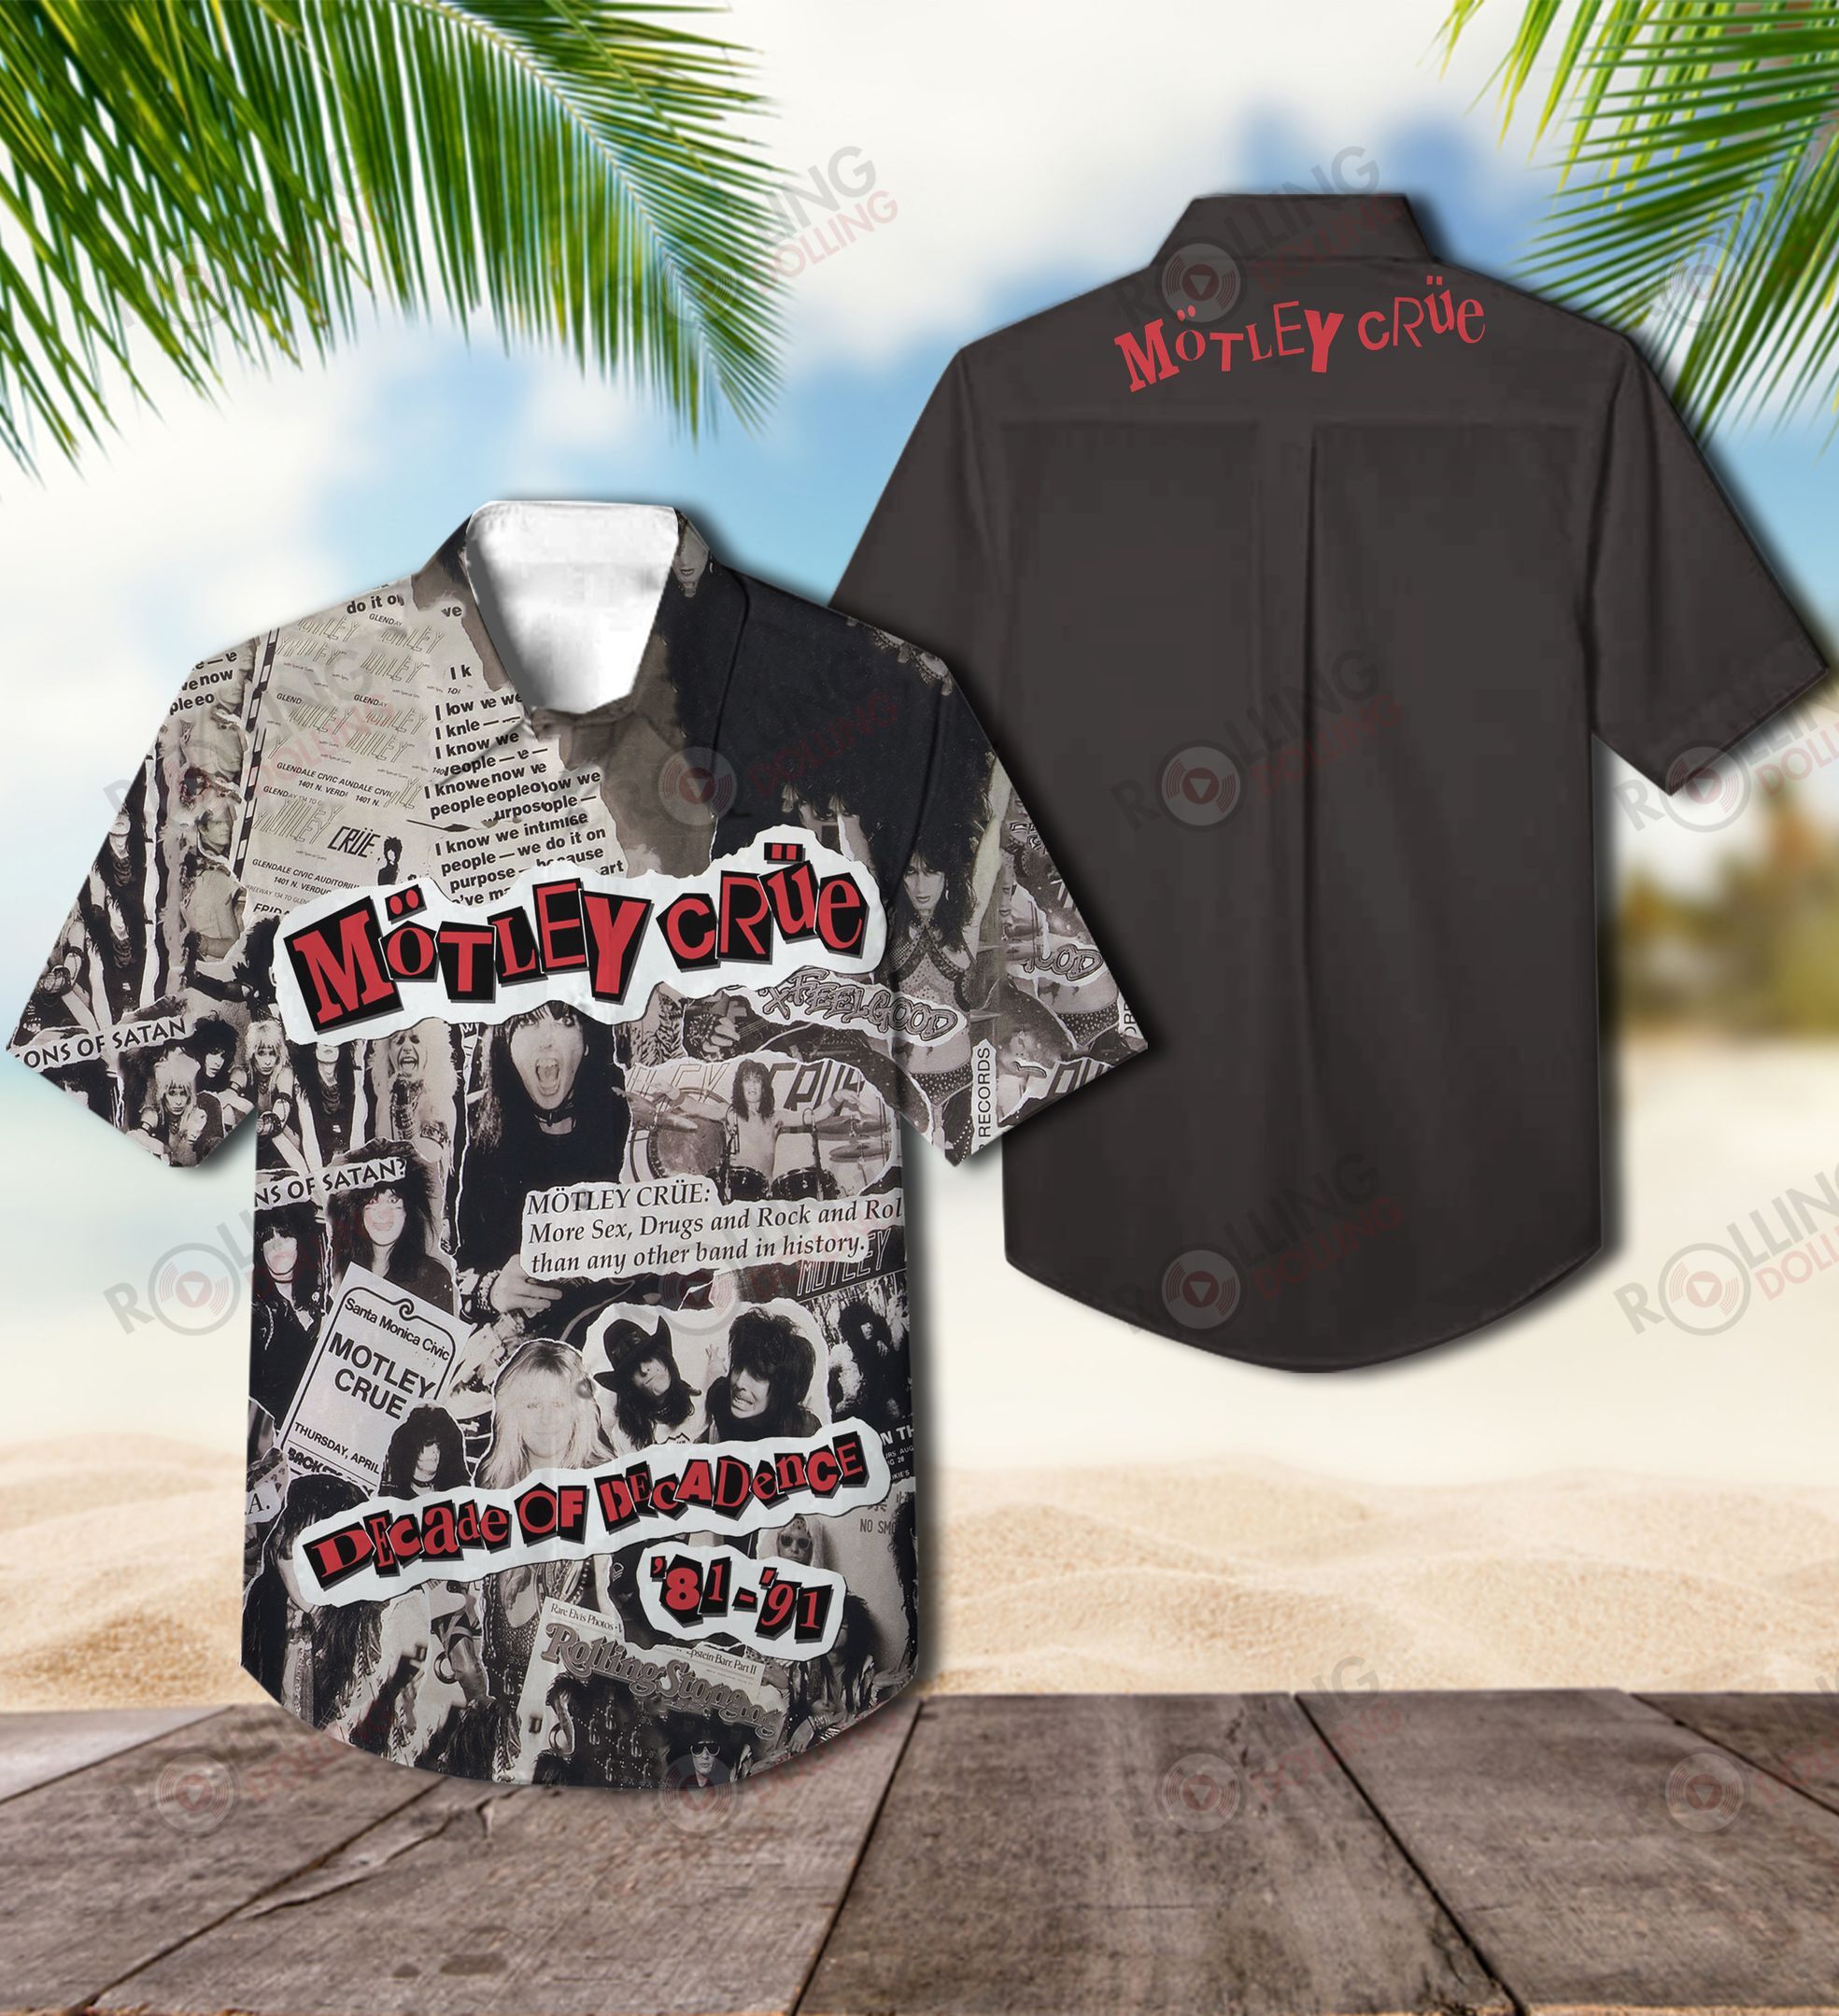 This would make a great gift for any fan who loves Hawaiian Shirt as well as Rock band 83